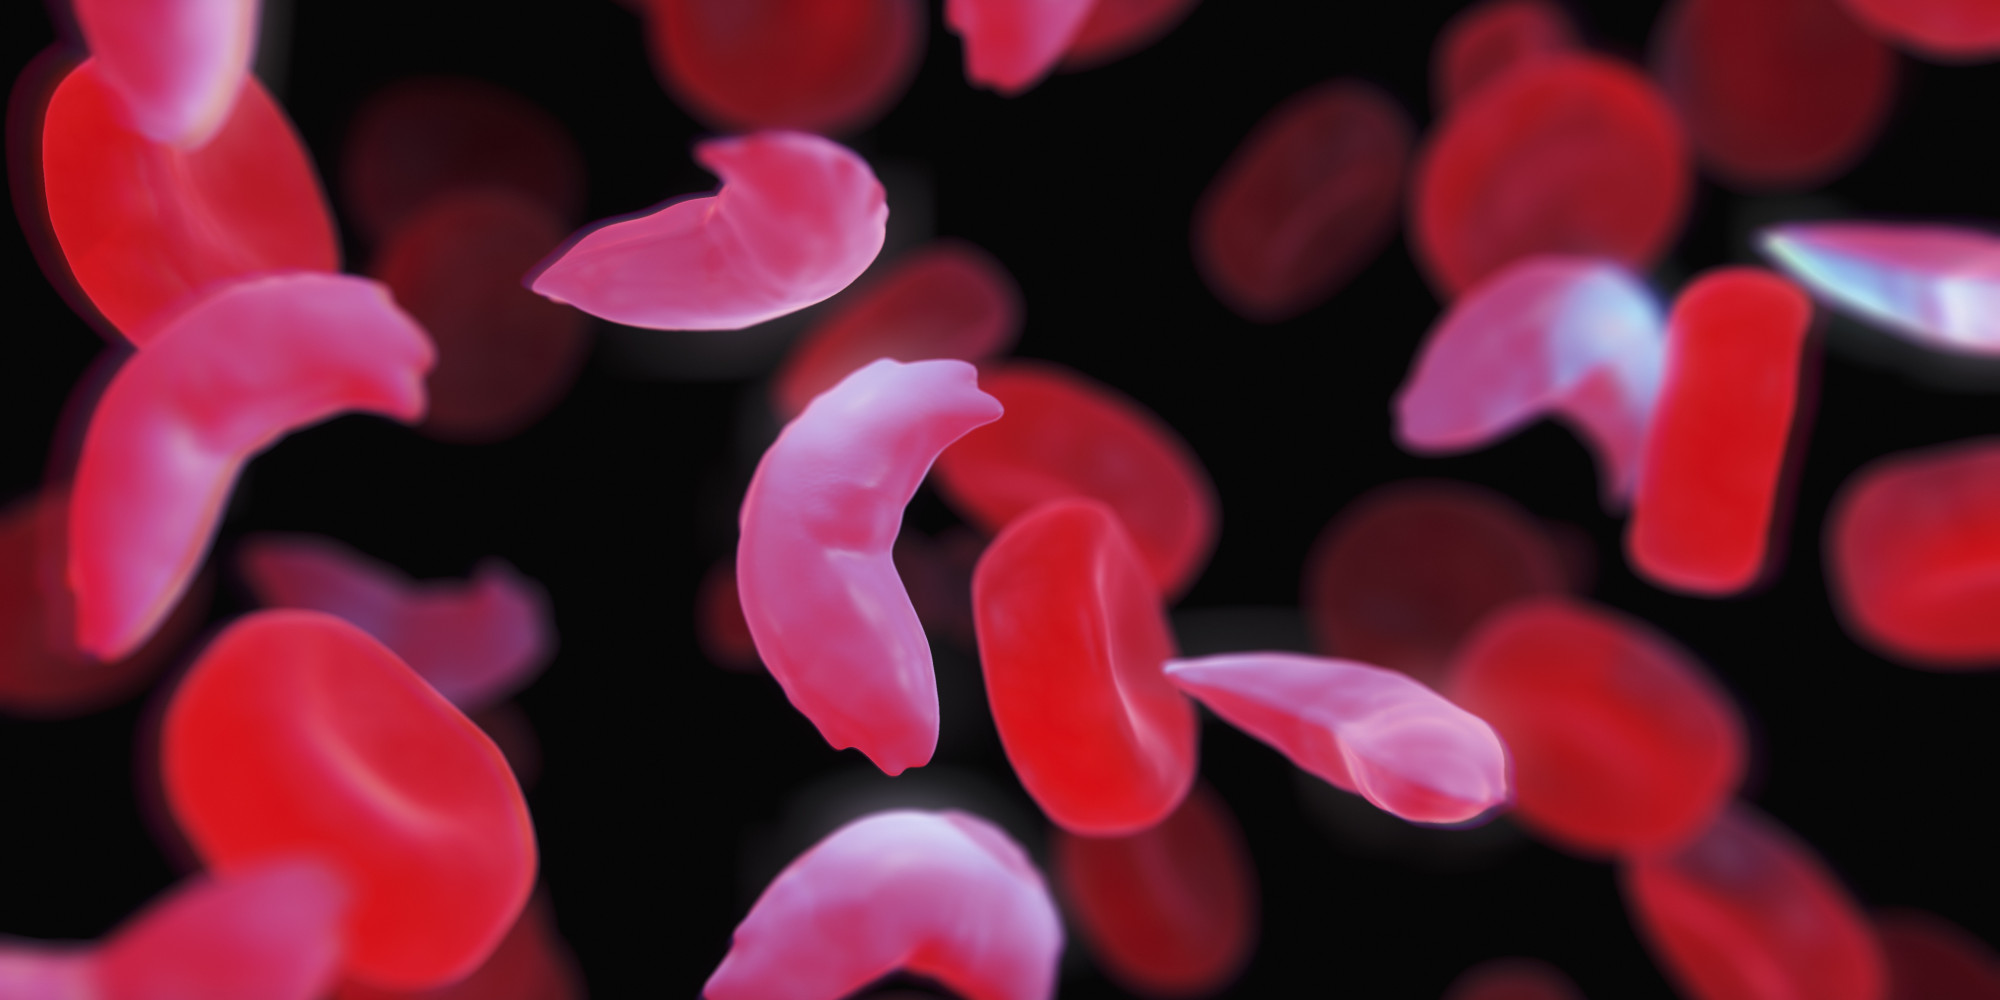 Black Americans With Sickle Cell Trait At Increased Risk ...